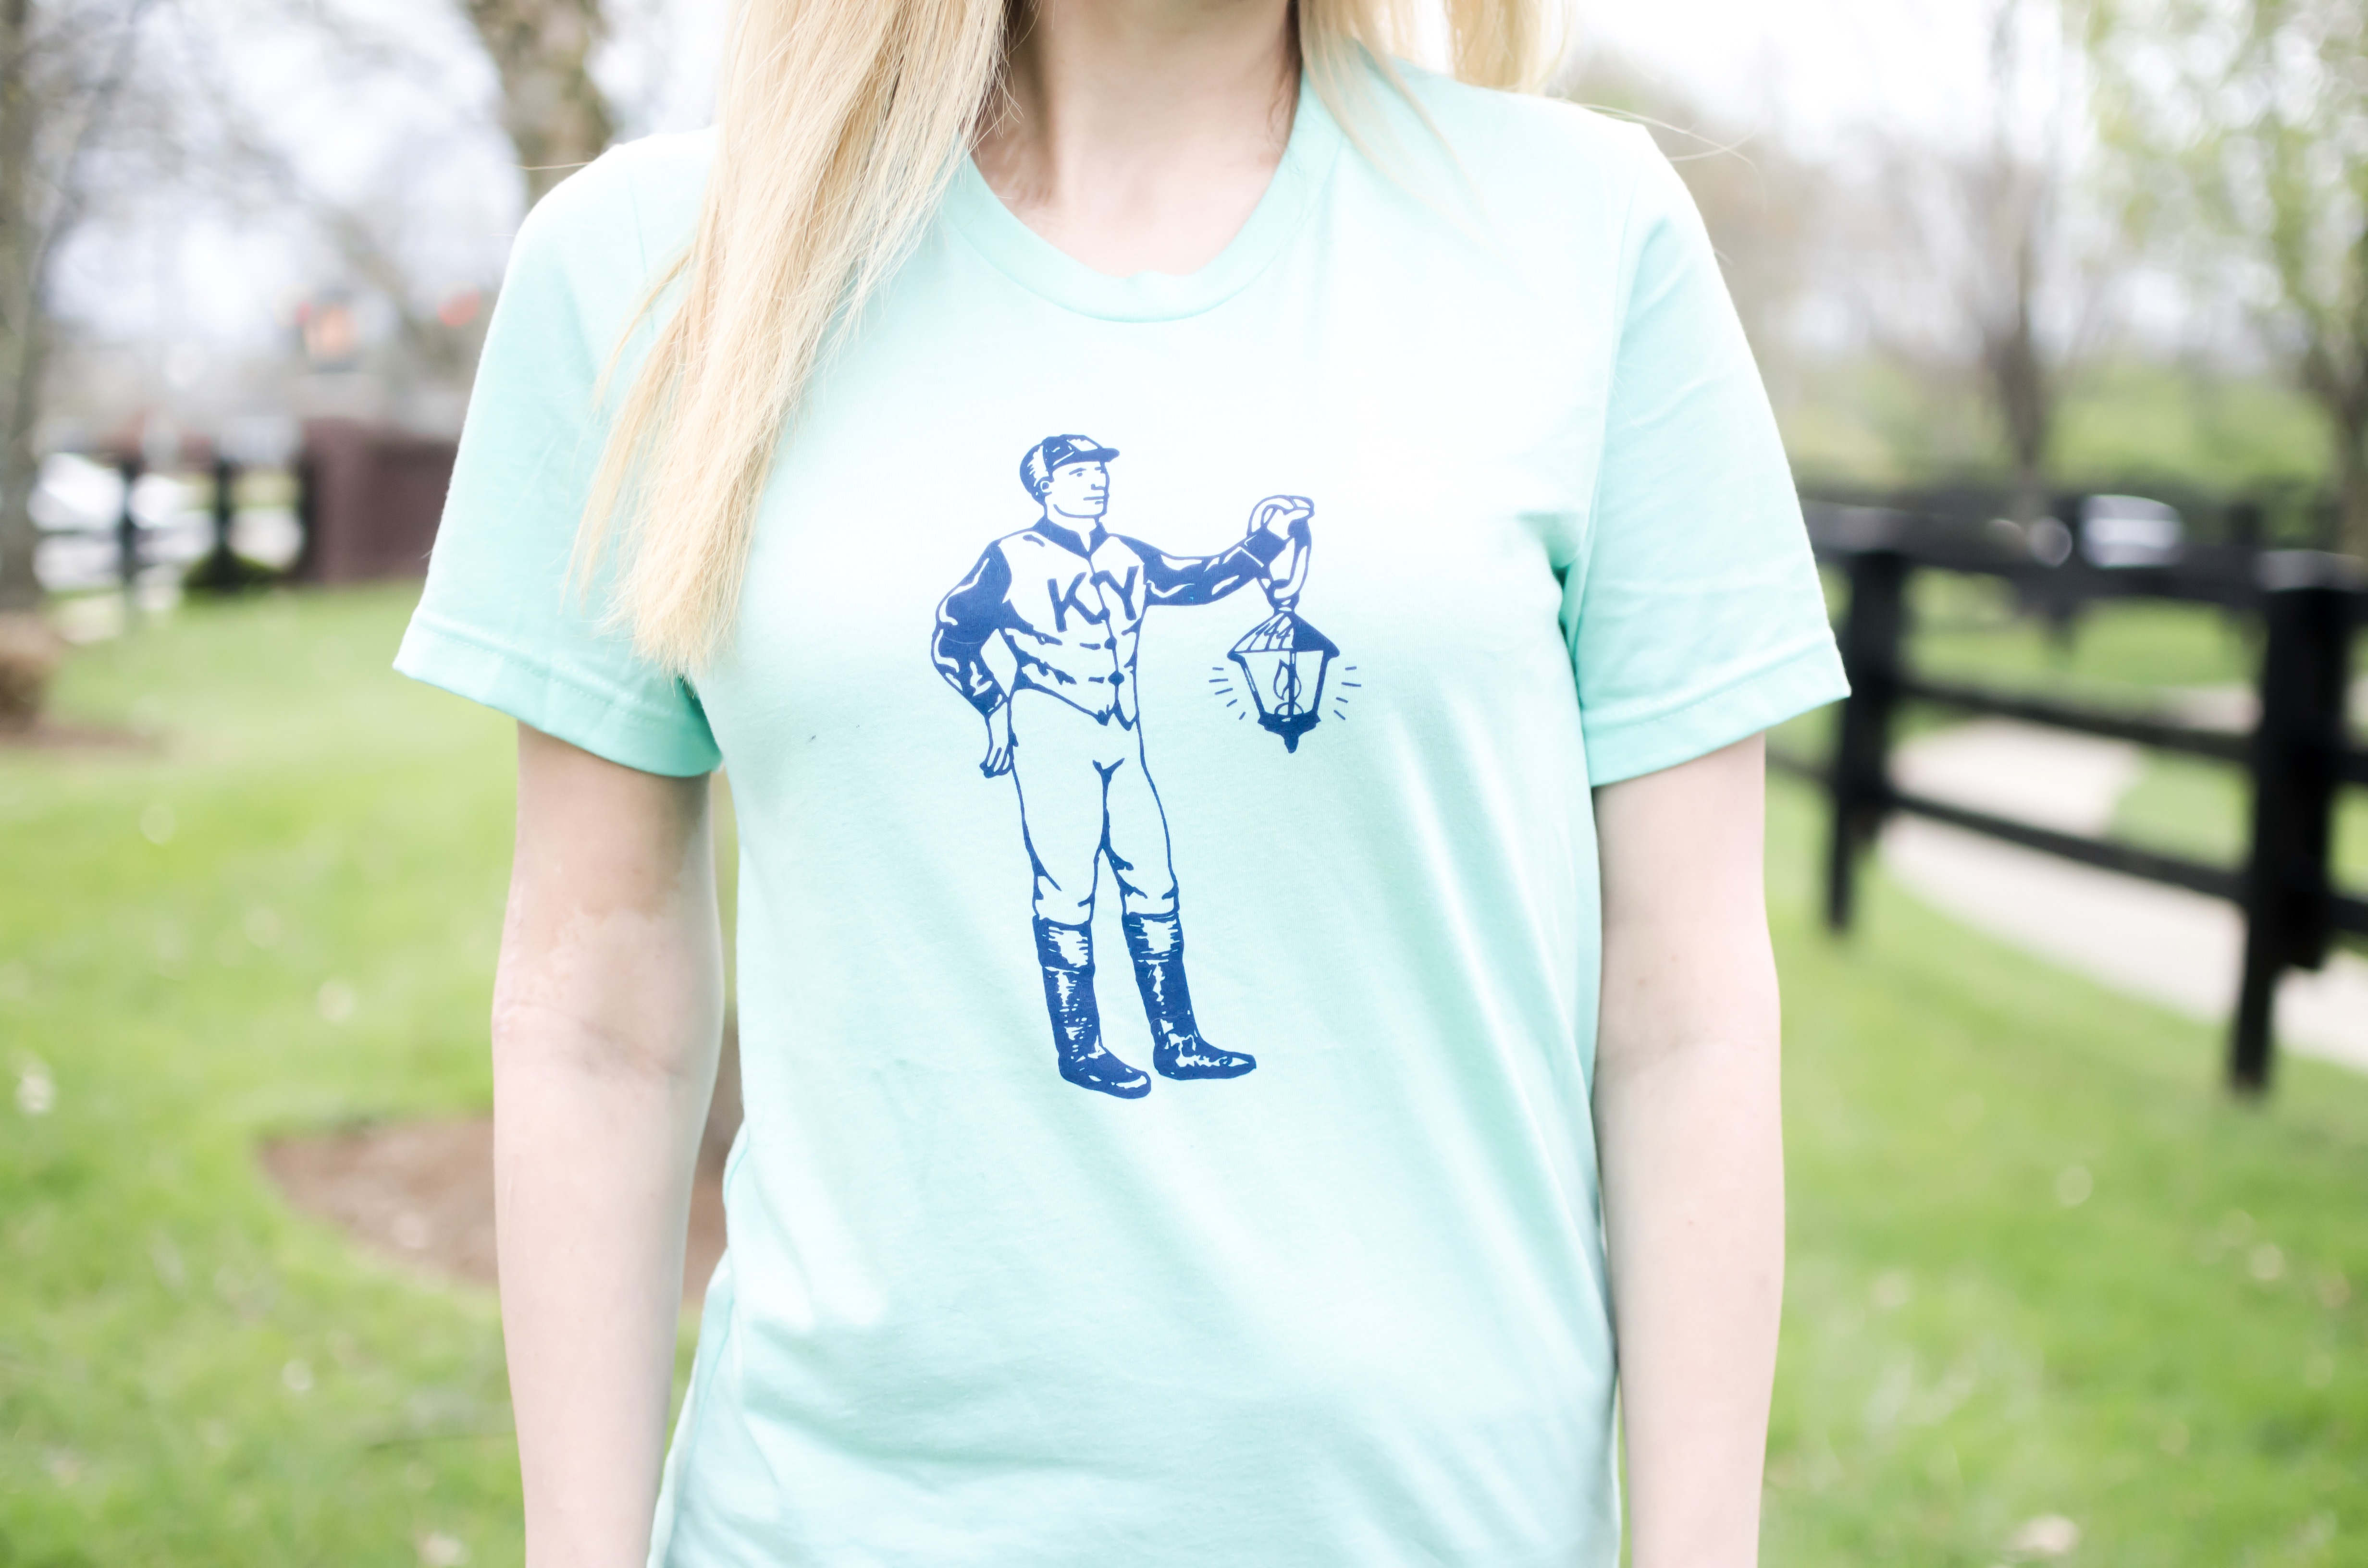 This week's "Local Spotlight" is none other than My Kentucky Tee. Hearing the name you might think it's just a t-shirt shop, but no, it's not! I mean, they do have shirts available for purchase on their website, but it is so much more than that! My Kentucky Tee is a subscription service where you'll receive a Kentucky themed shirt (aka "Tee of the Month") every month! #sharethelex #lexingtonky #kentucky #shoplocal #travelky #visitlex #statepride #fashion #casual